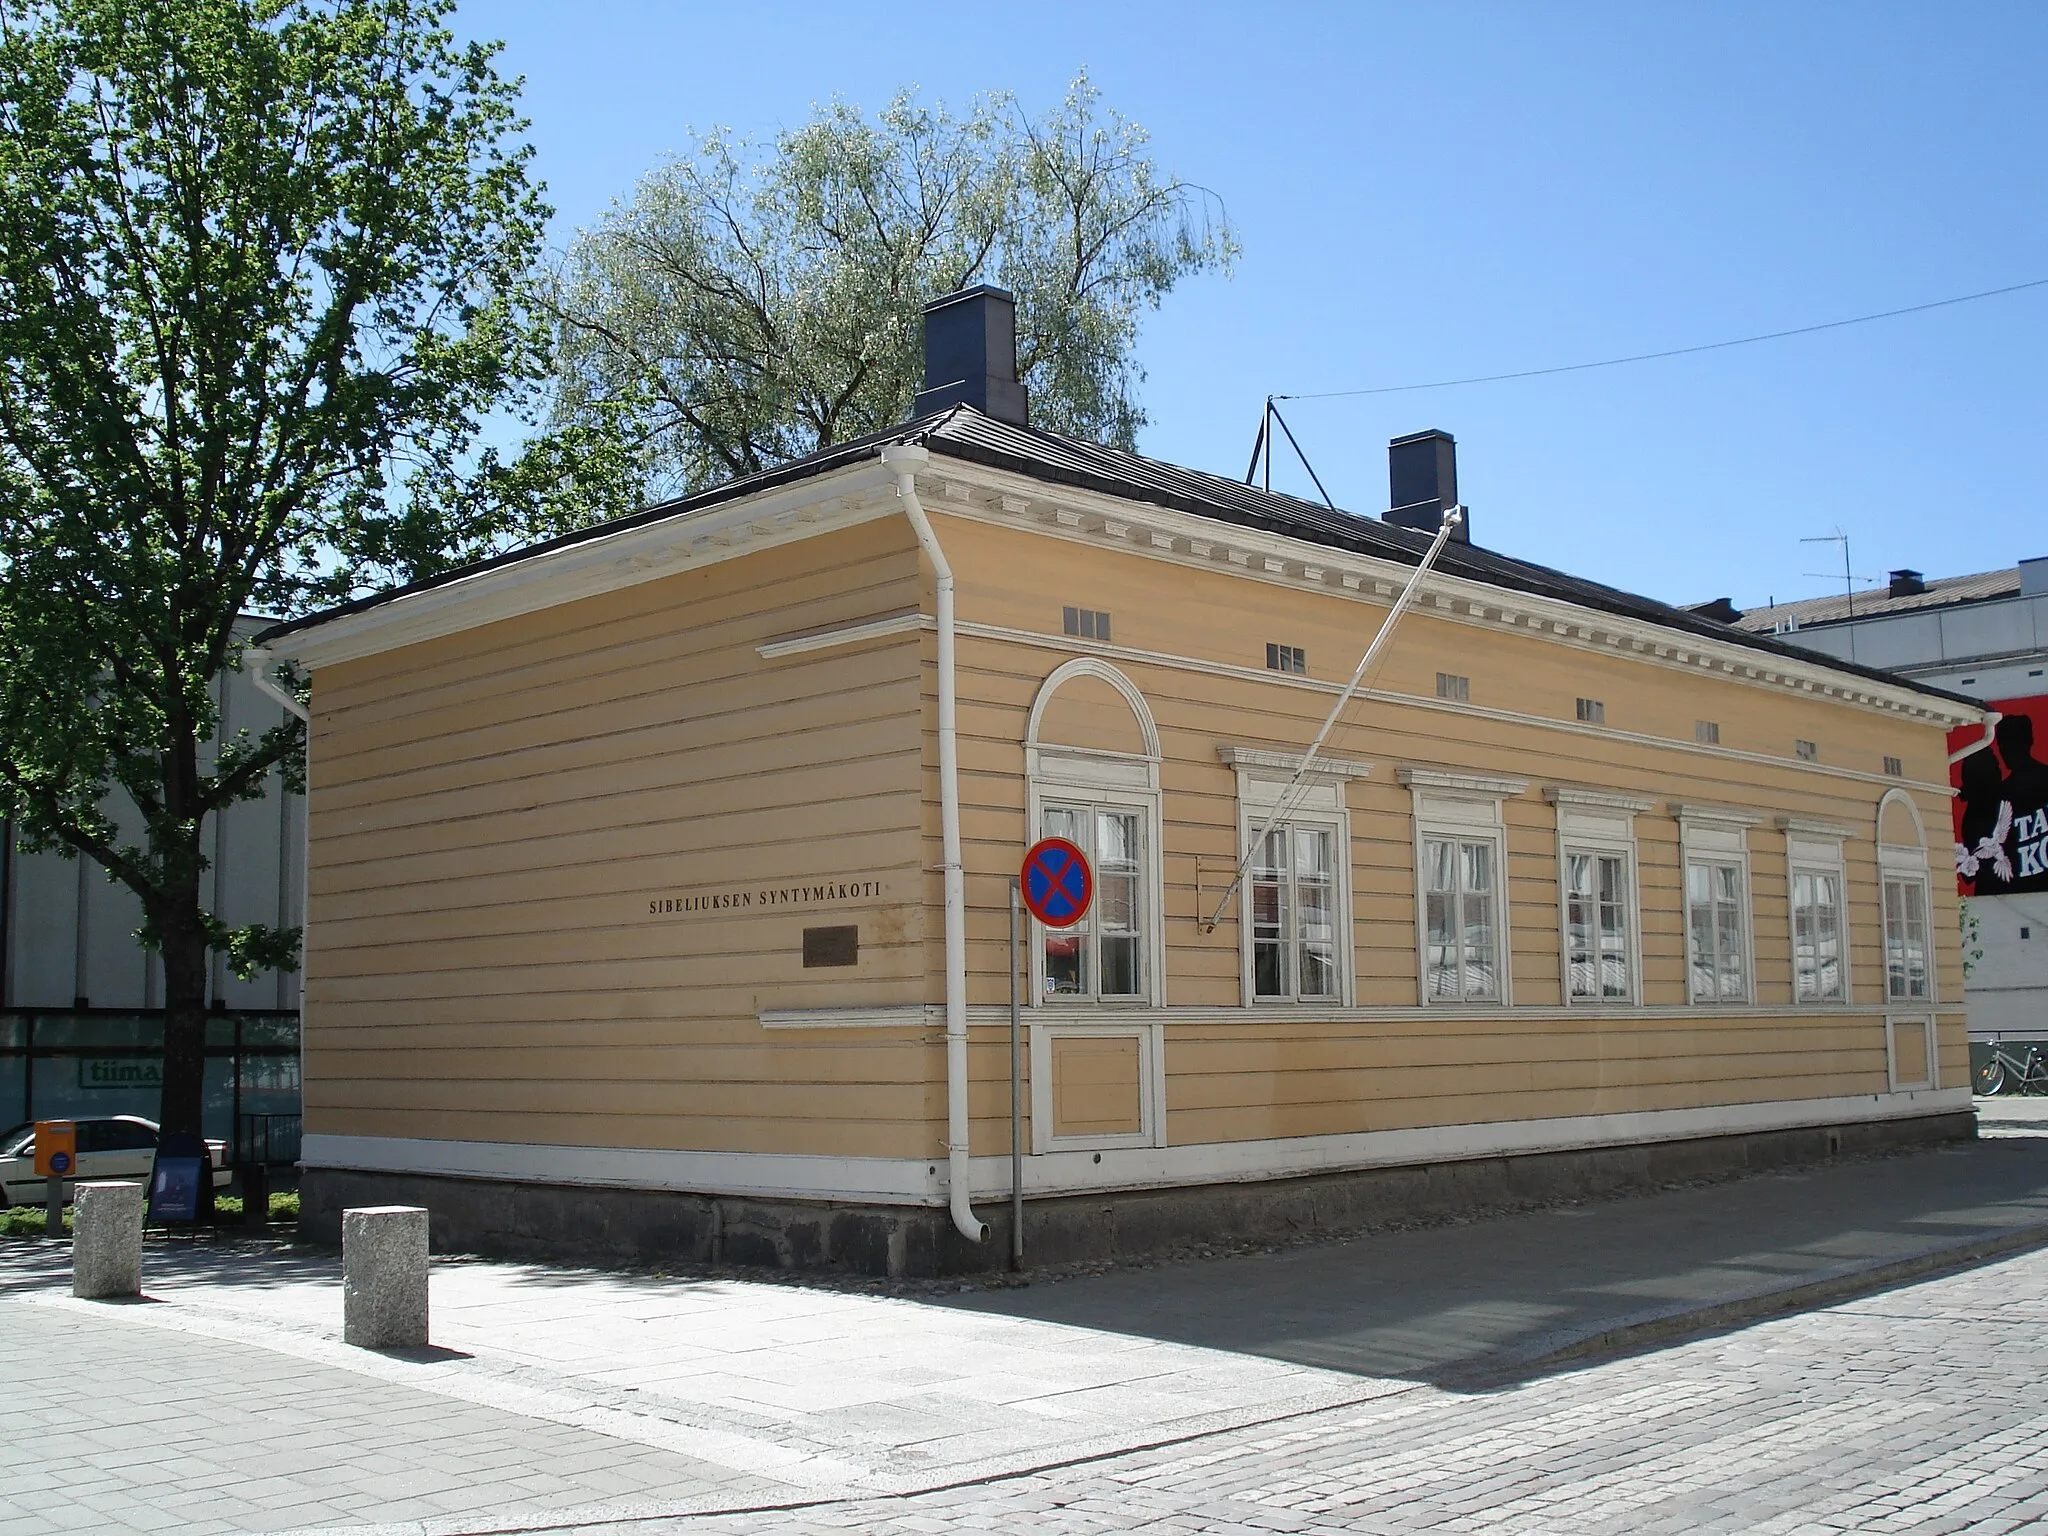 Photo showing: Preserved house (now museum) in Hämeenlinna, Finland in which Jean Sibelius was born.